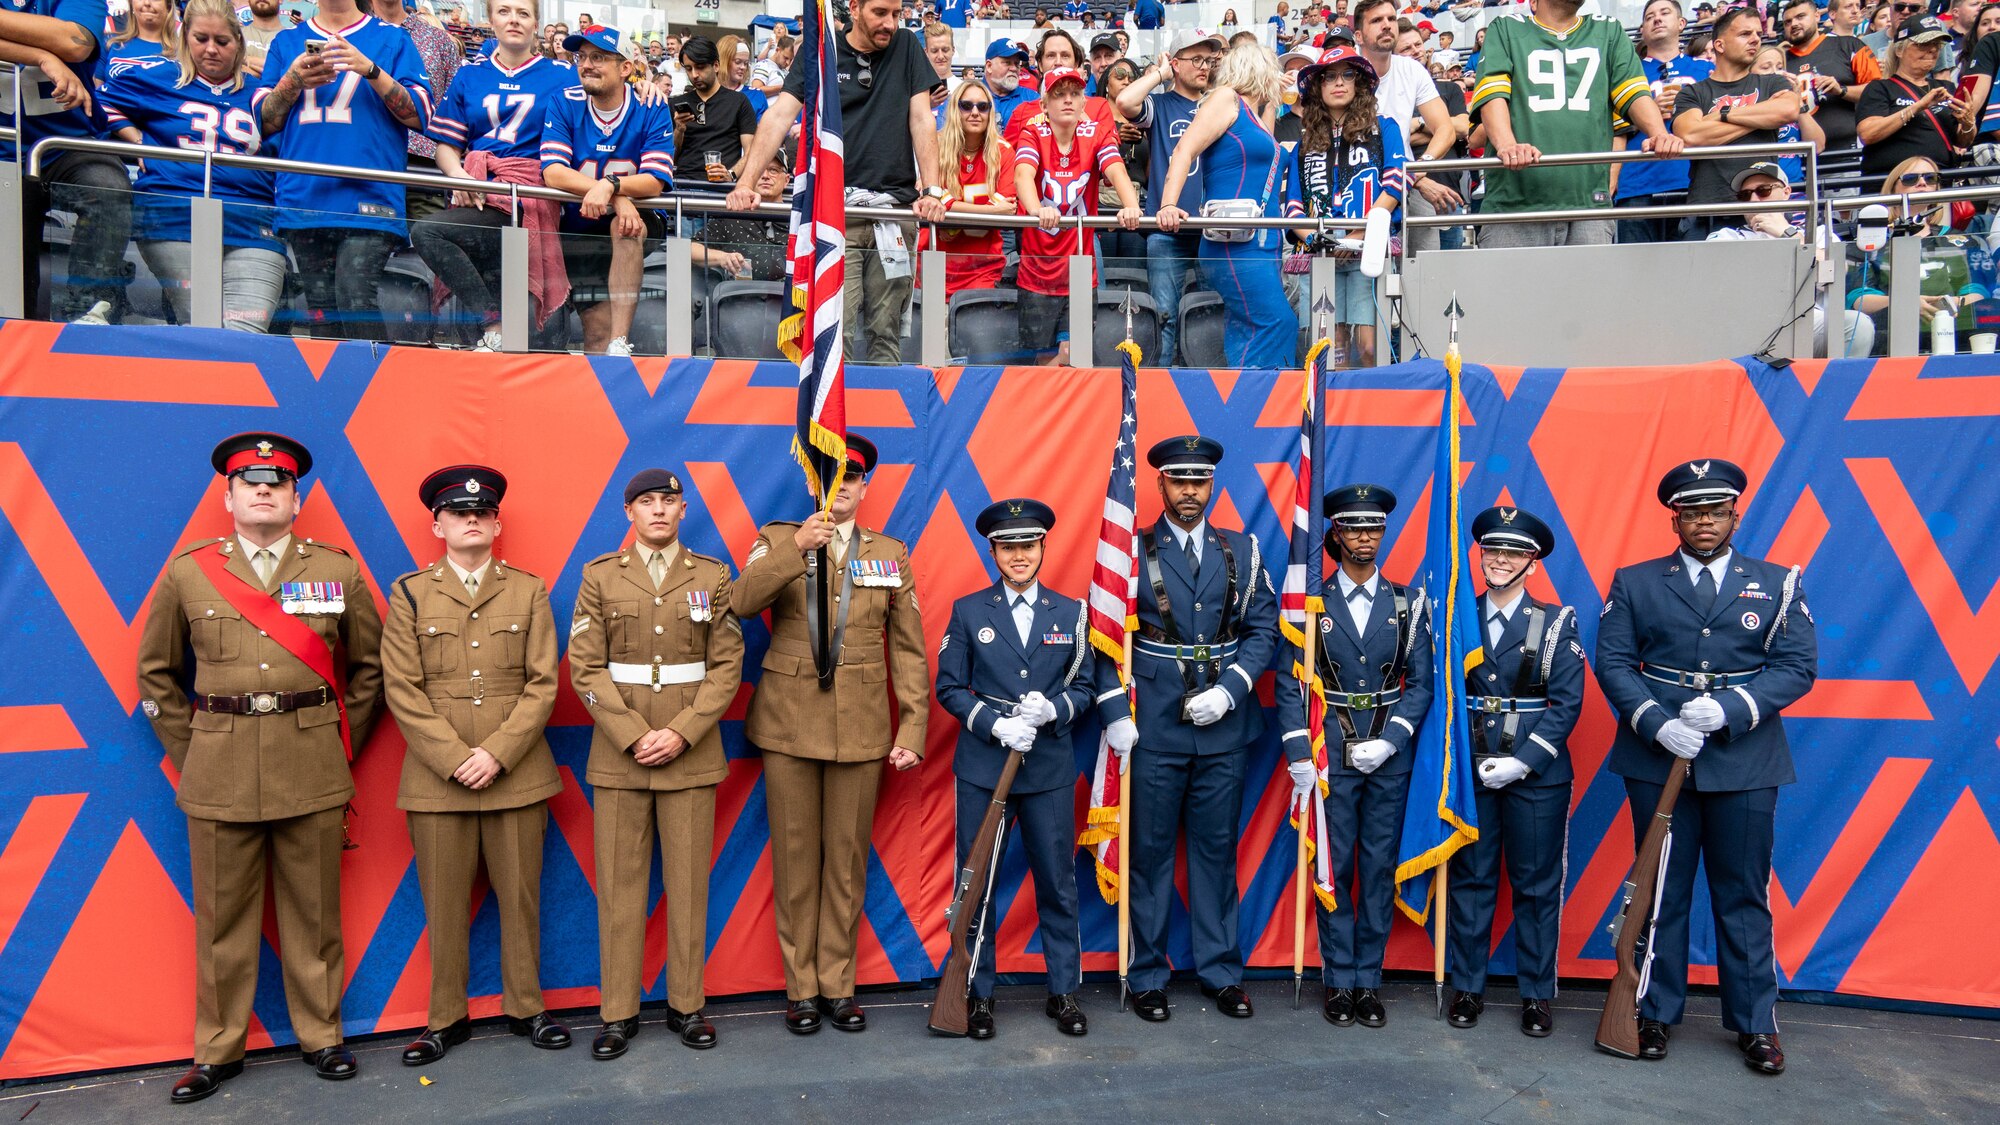 British and American Honor Guard members pose for a group photo